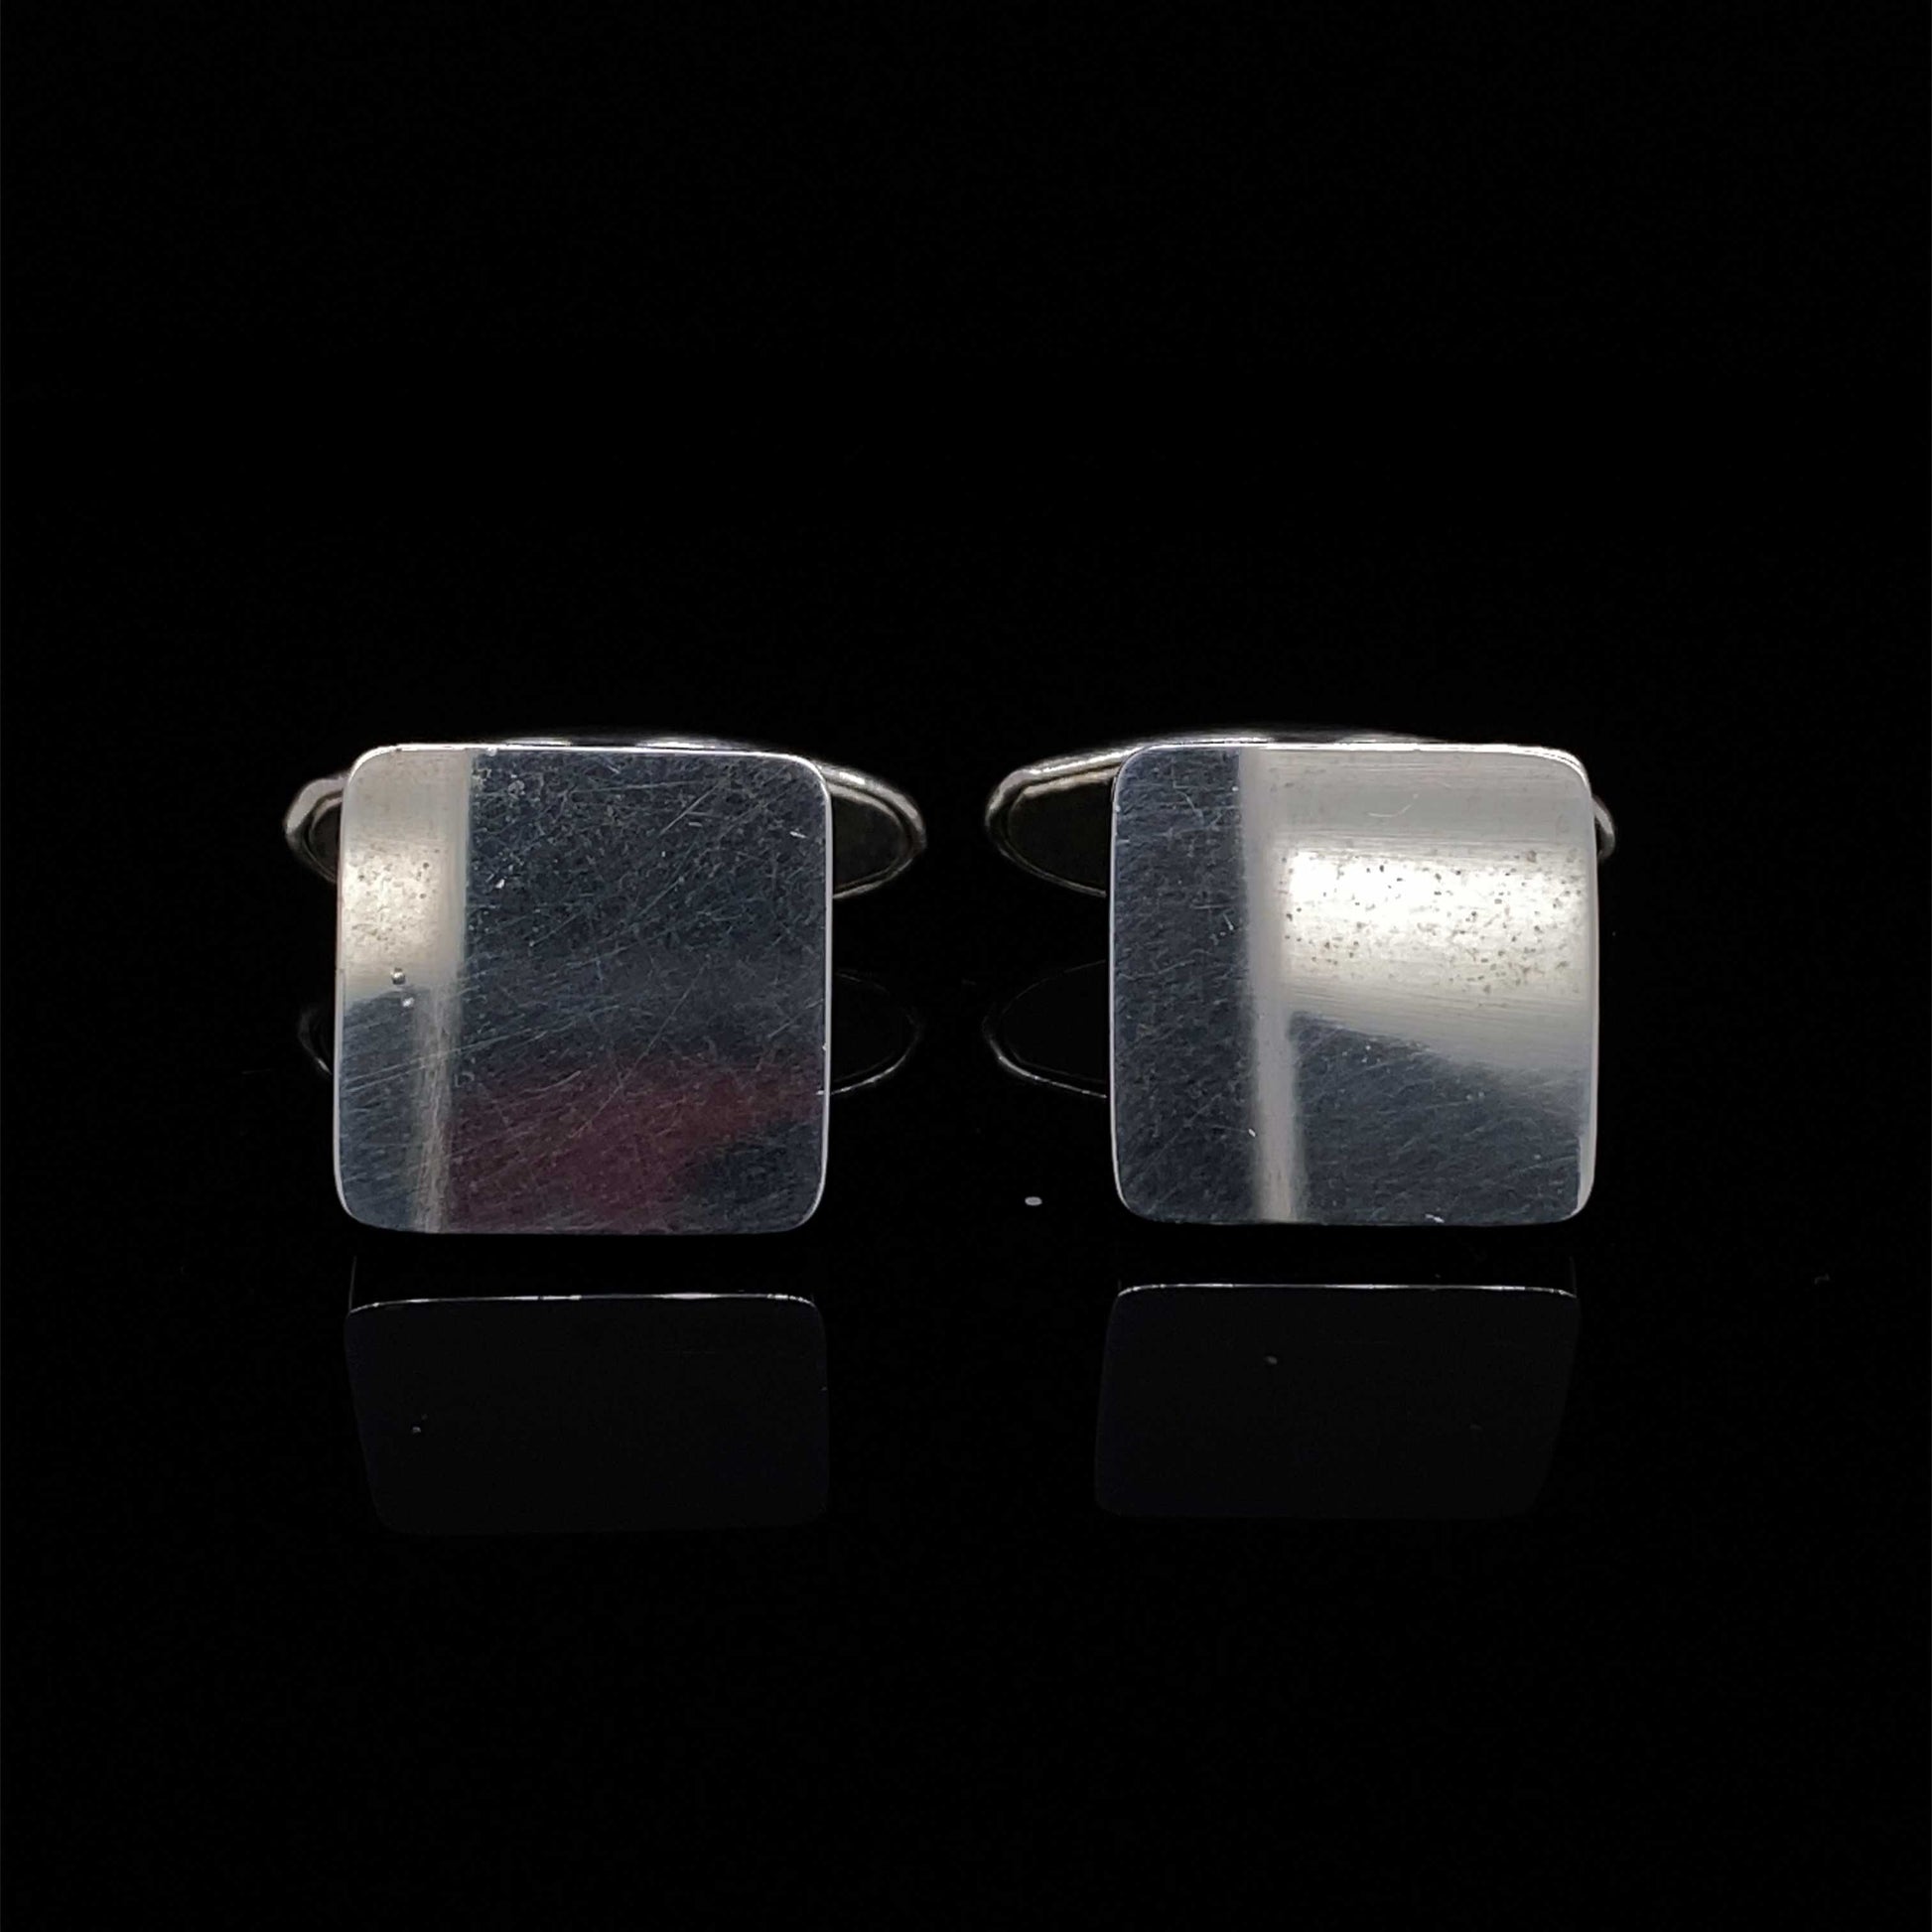 Silver Square Shaped Cufflinks